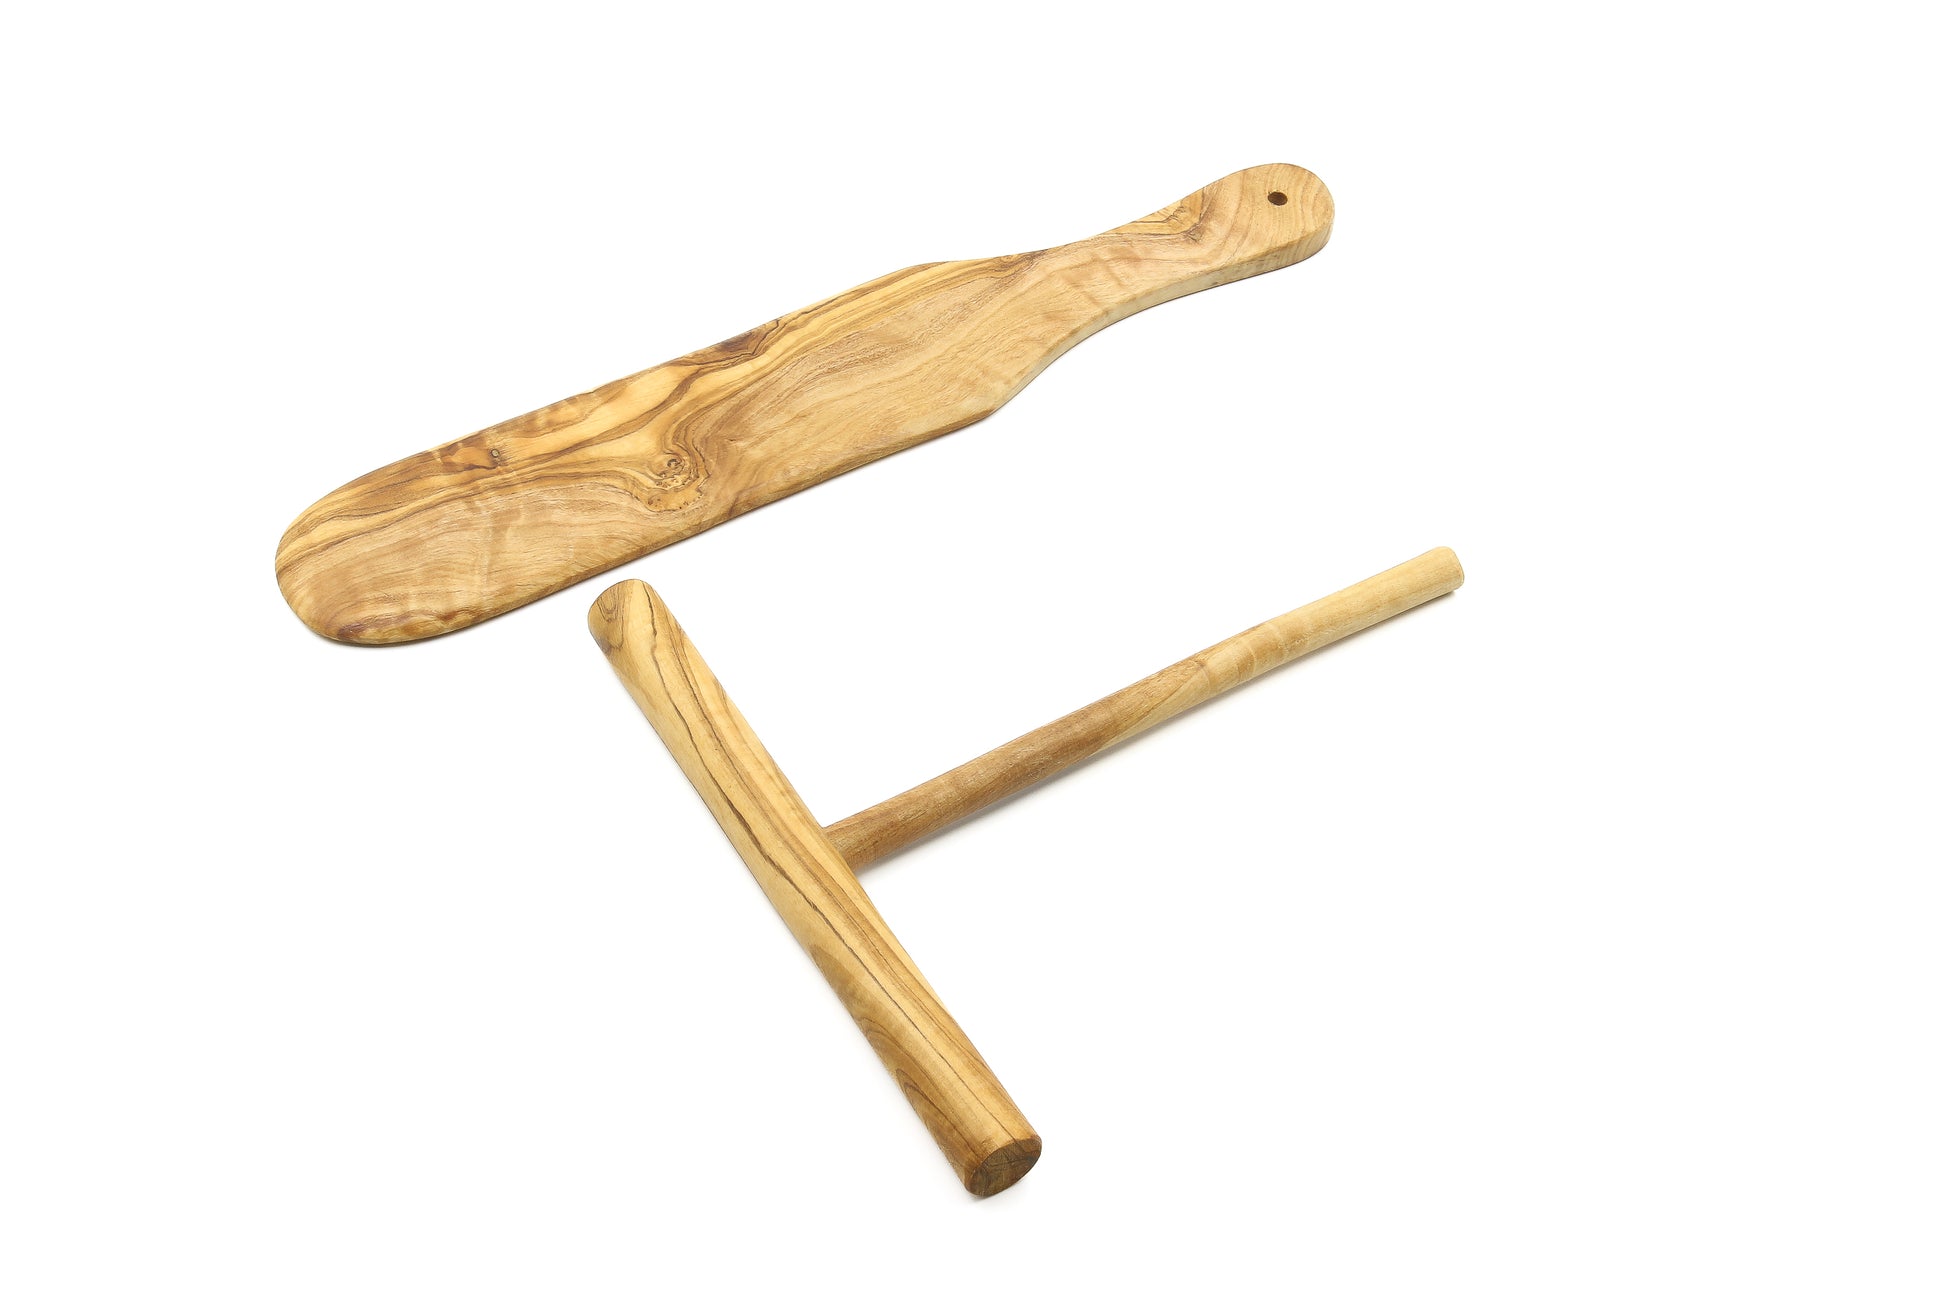 A stylish and sustainable Basic set crafted from natural olive wood